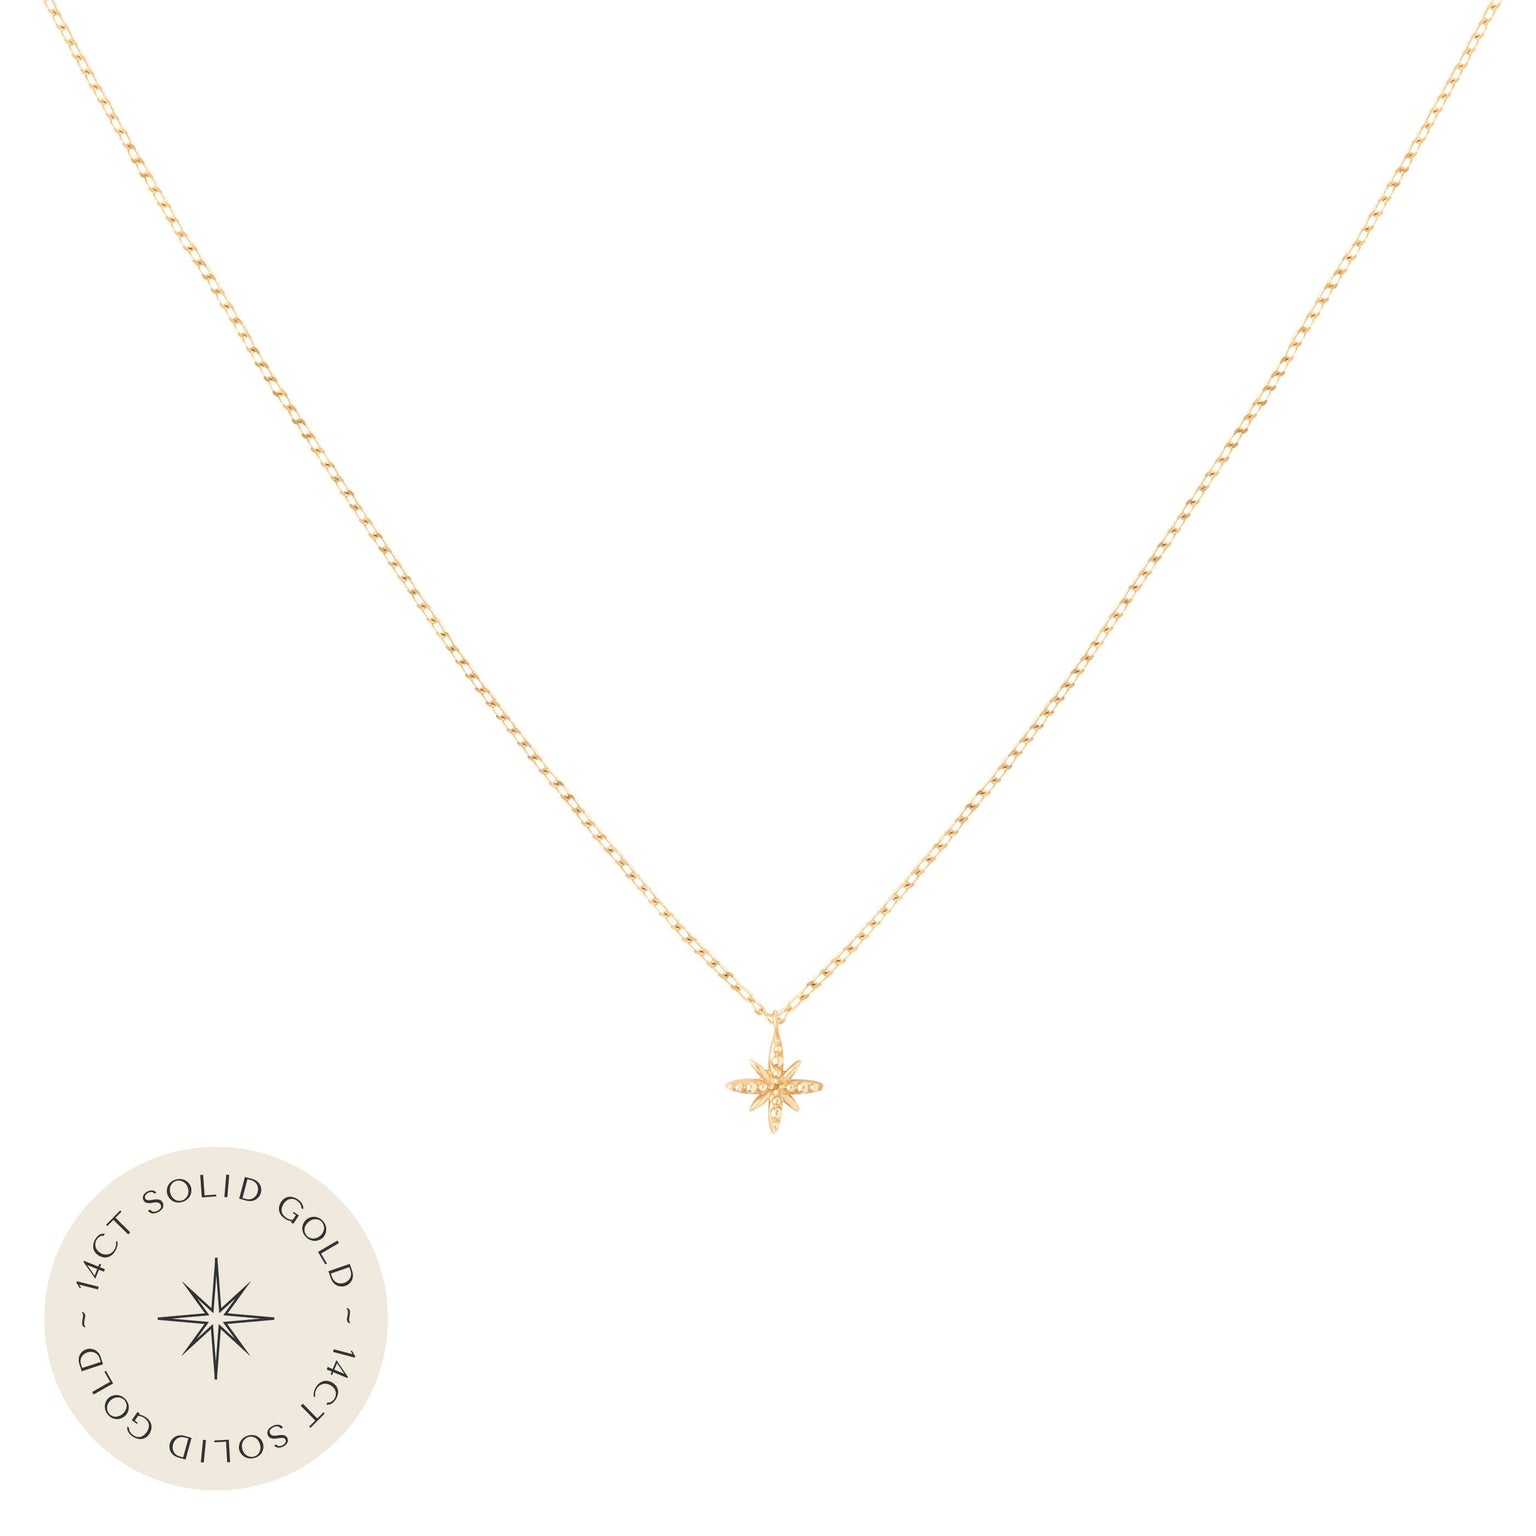 Twilight Pendant Necklace in Solid Gold with 14CT solid gold label